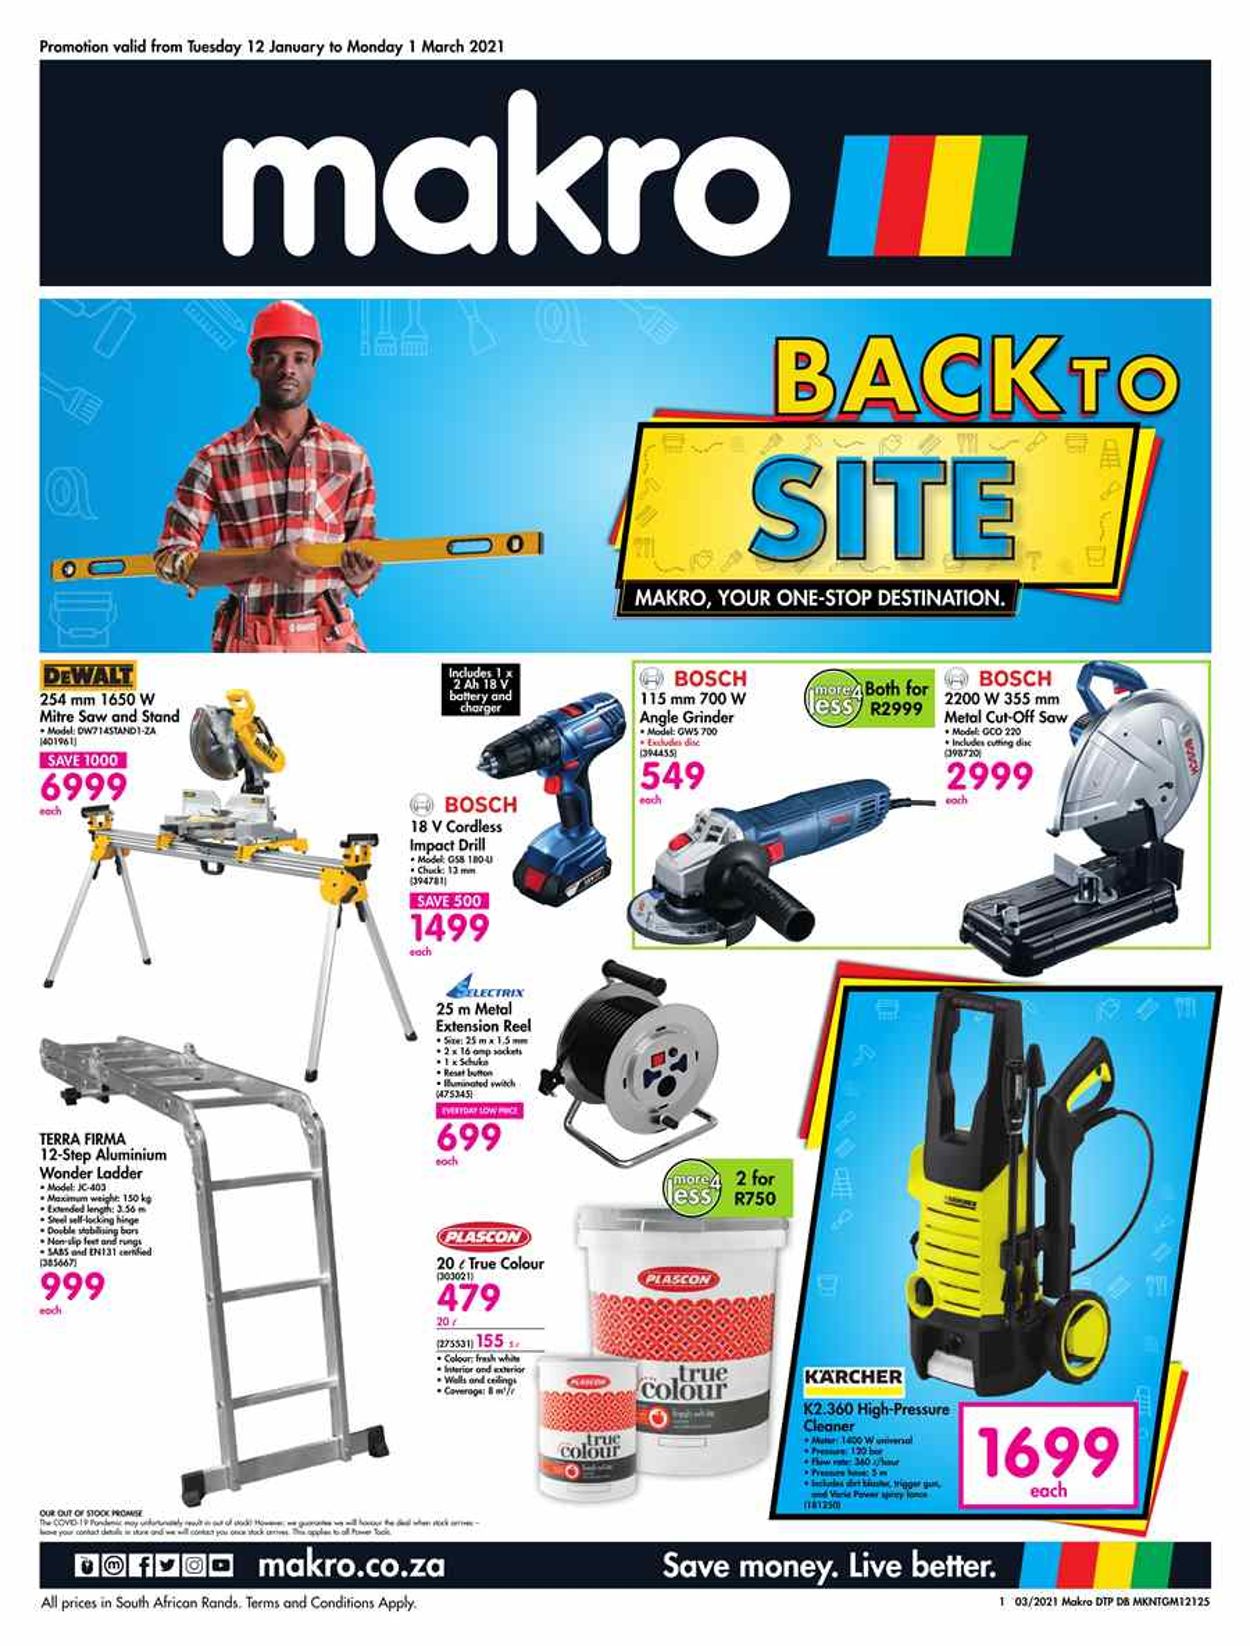 Makro Back to Site 2021 Catalogue - 2021/01/12-2021/03/01